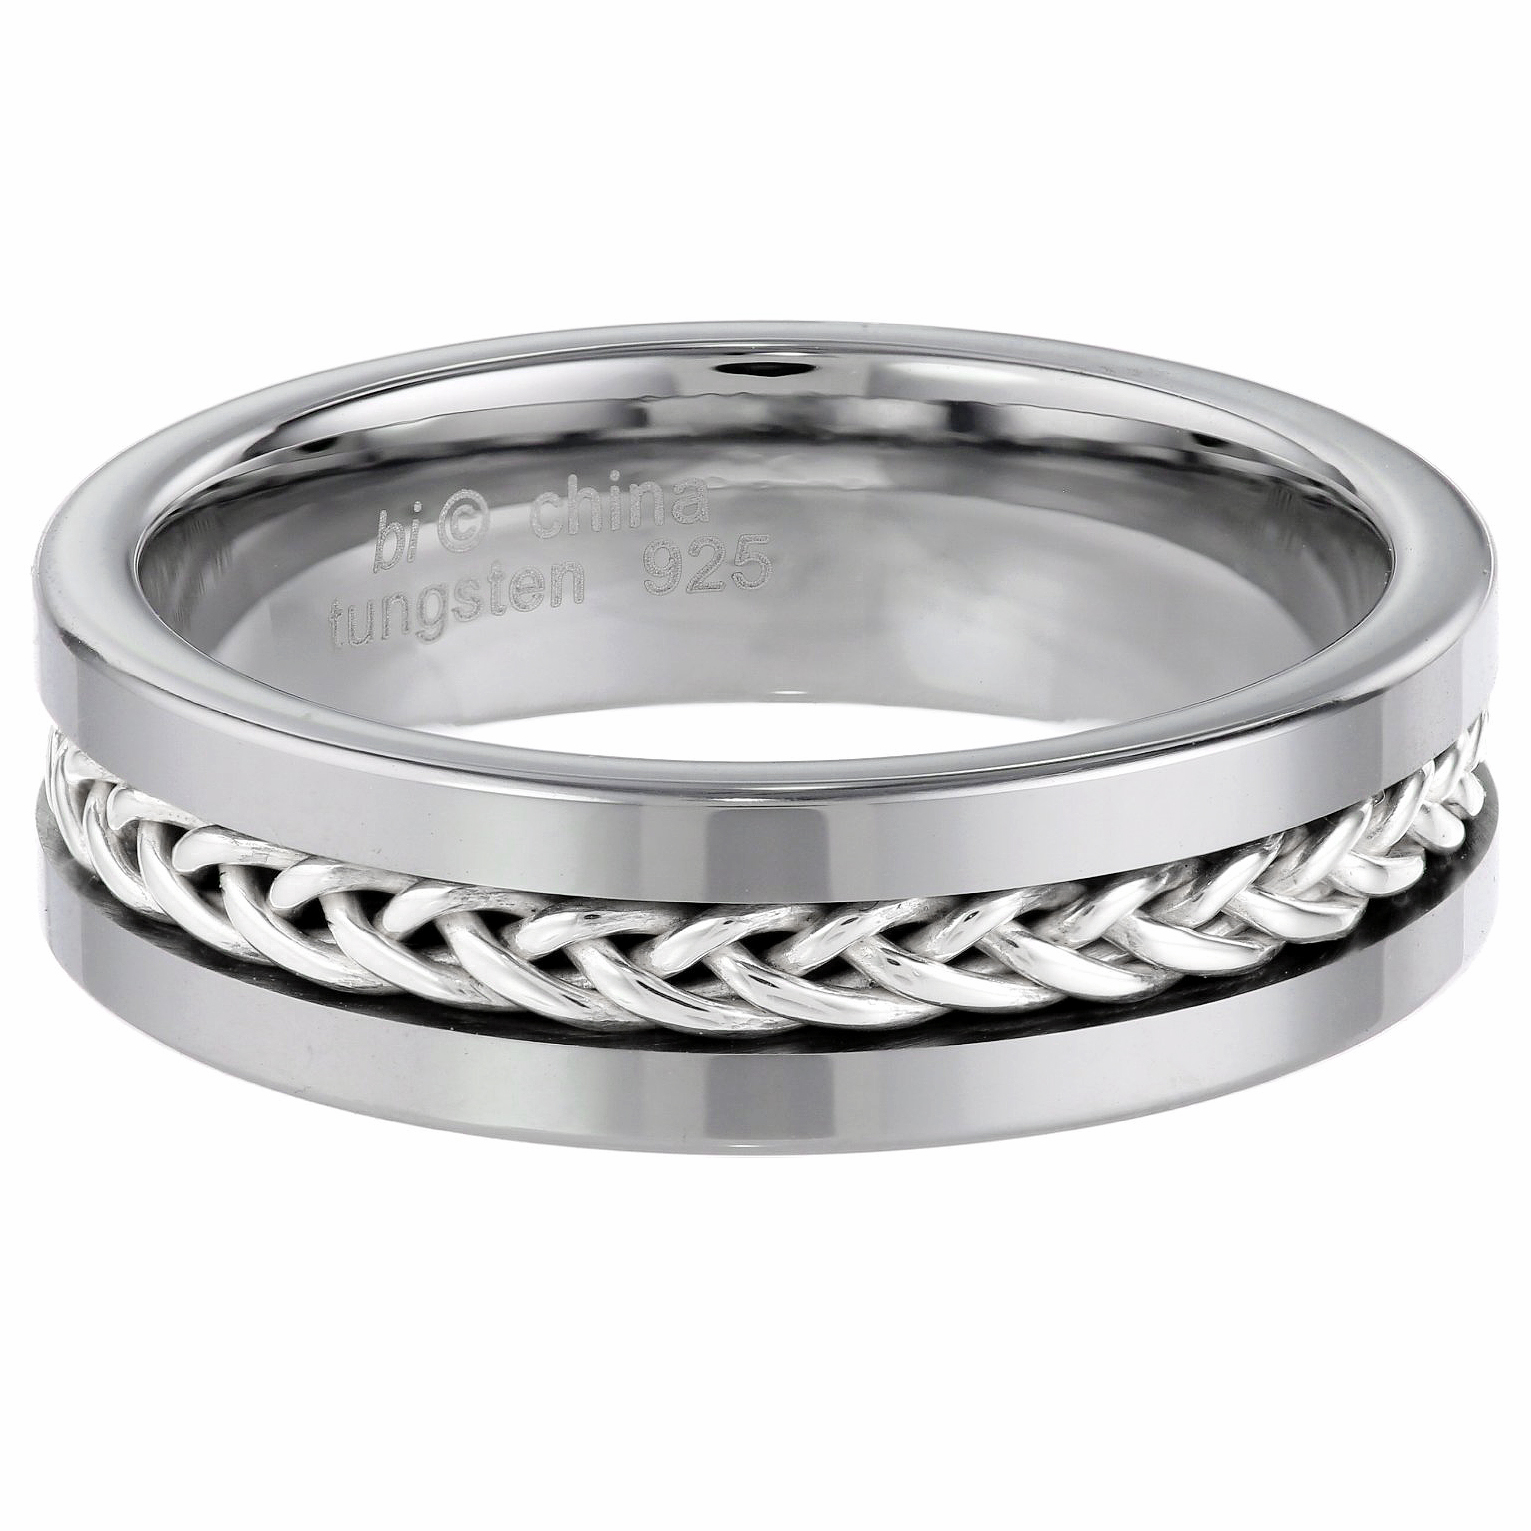 Stainless Steel Ring With Silver Braided Inlay